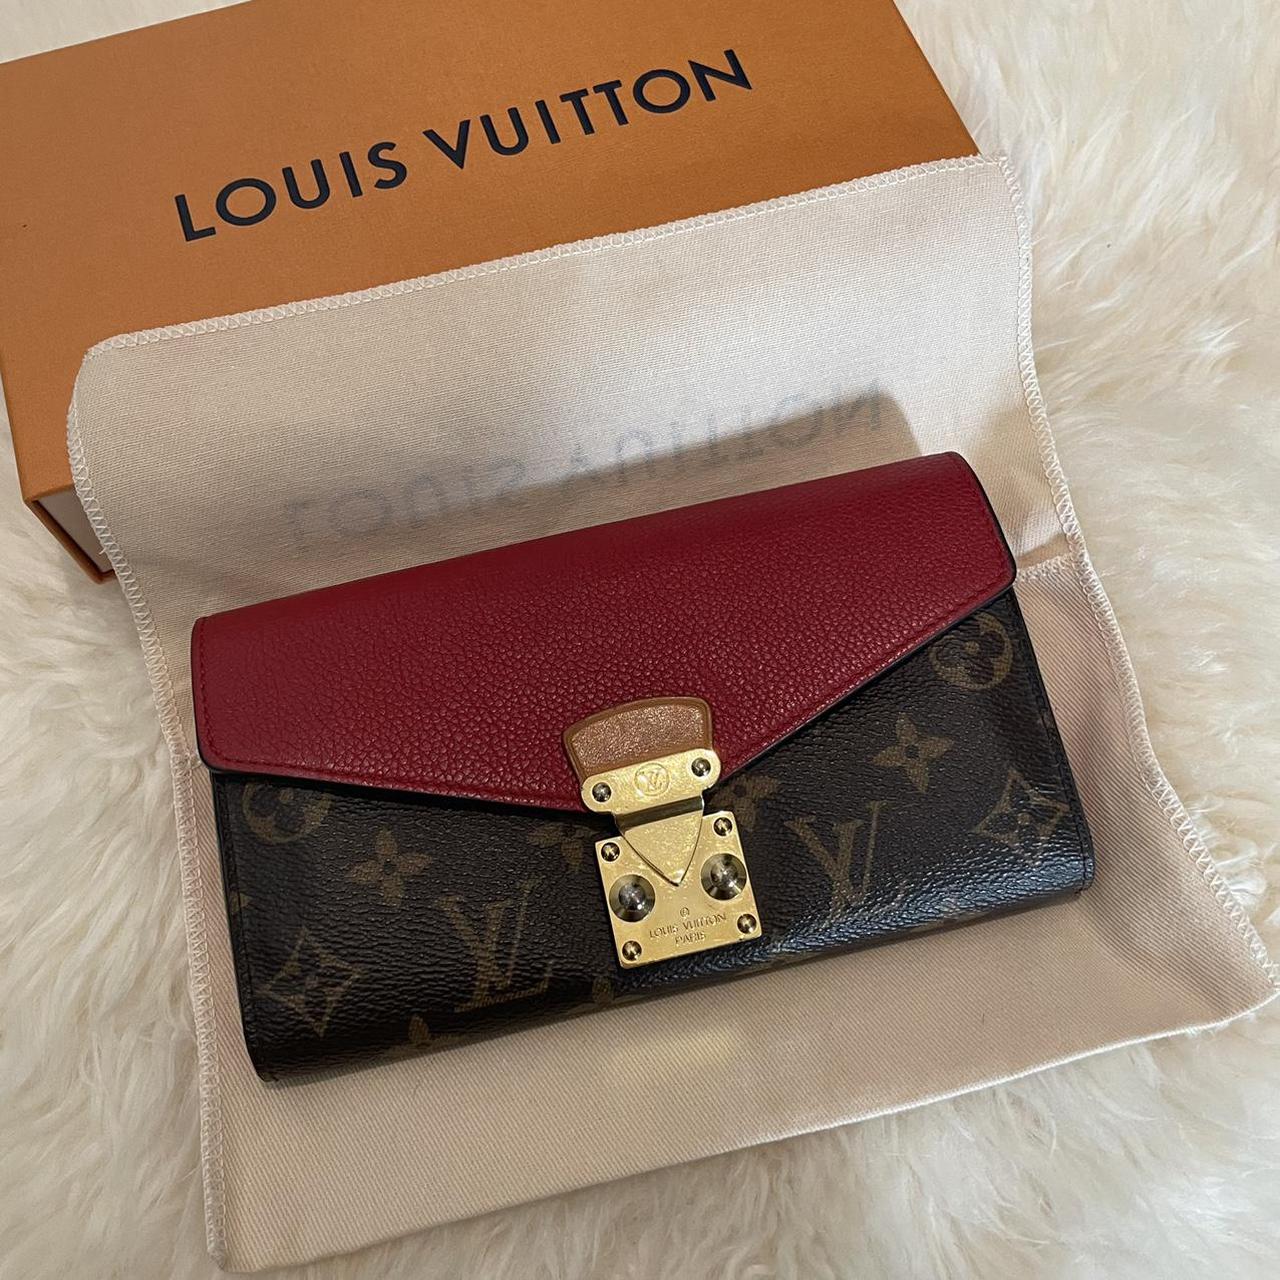 Louis Vuitton - Authenticated Pallas Wallet - Leather Brown for Women, Good Condition